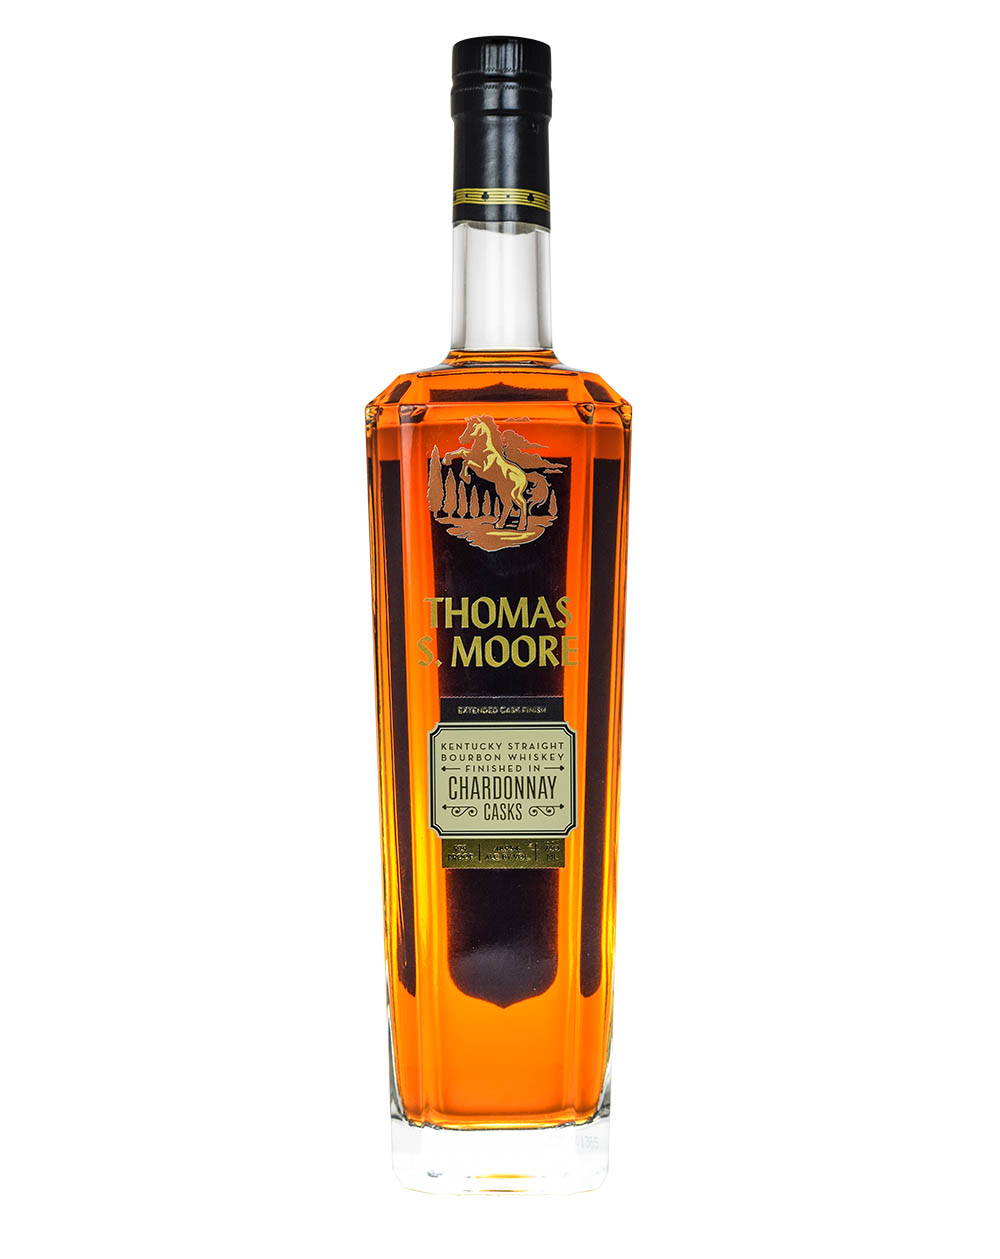 Thomas S. Moore Chardonnay Casks Musthave Malts MHM